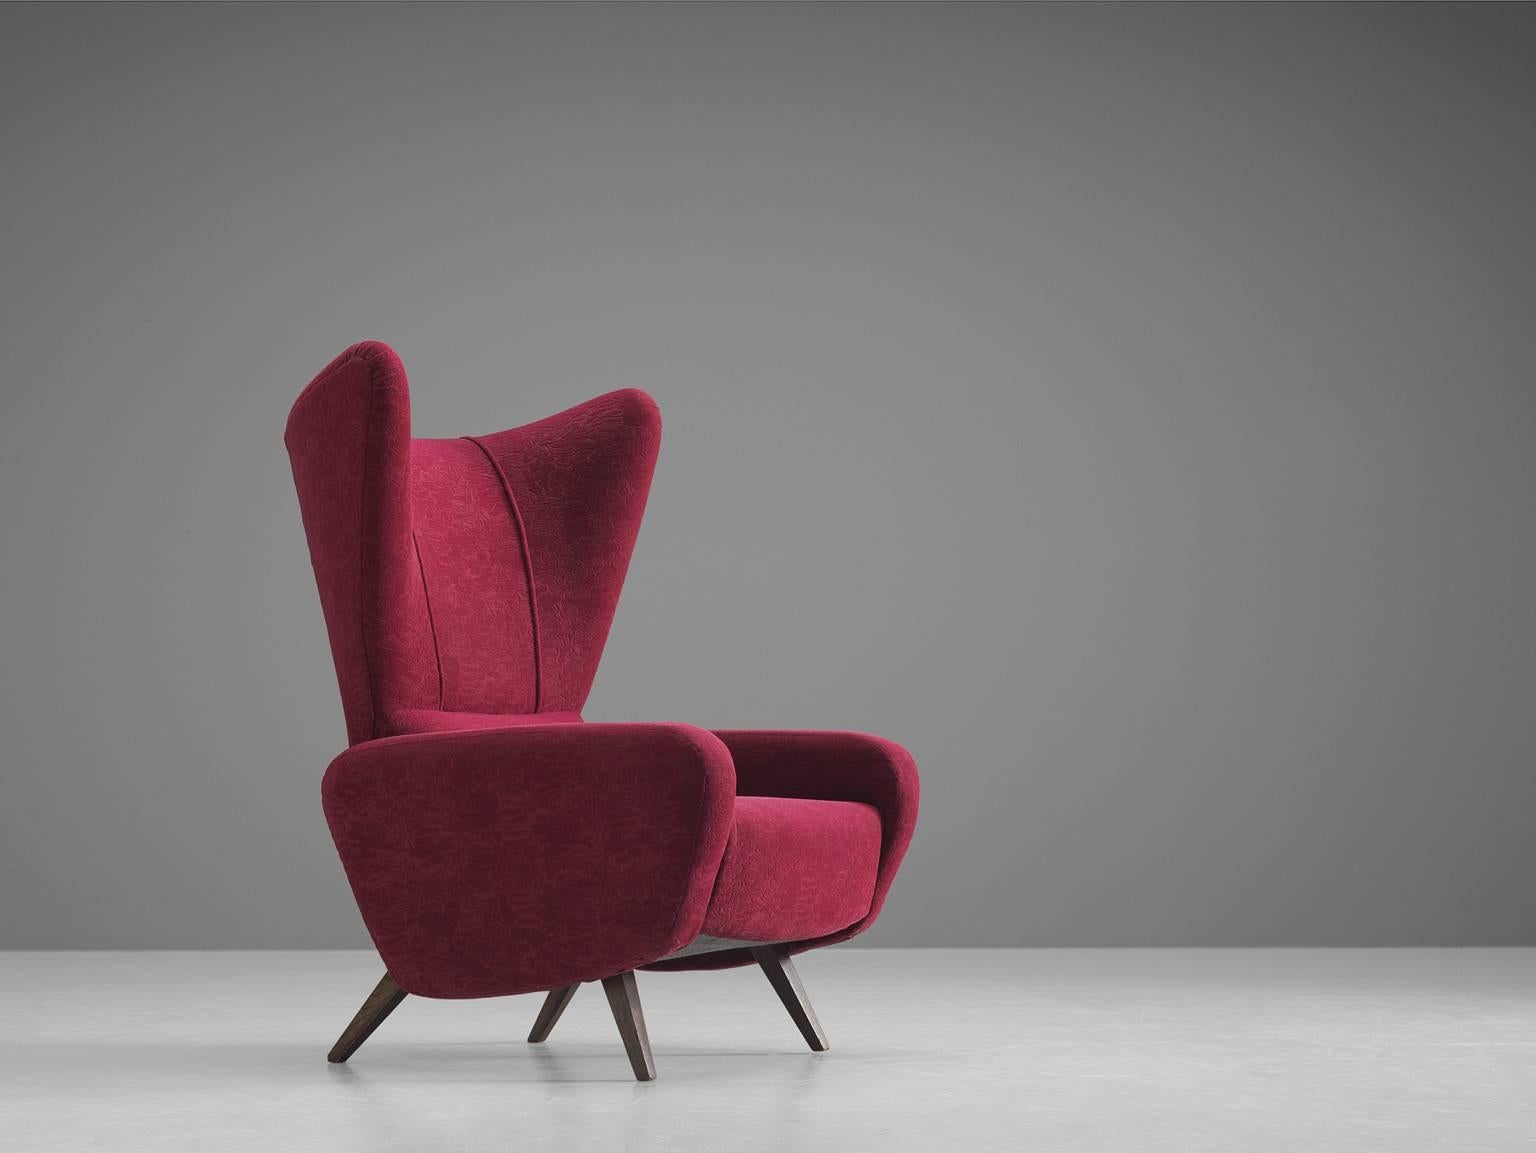 Large Italian wingback armchair in the style of Gio Ponti, red to pink fabric, ebonized conical wood legs, Italy, 1950s.

This Classic Italian wingback chair has all the traits of Midcentury Italian design. The unusually high back, the gracious